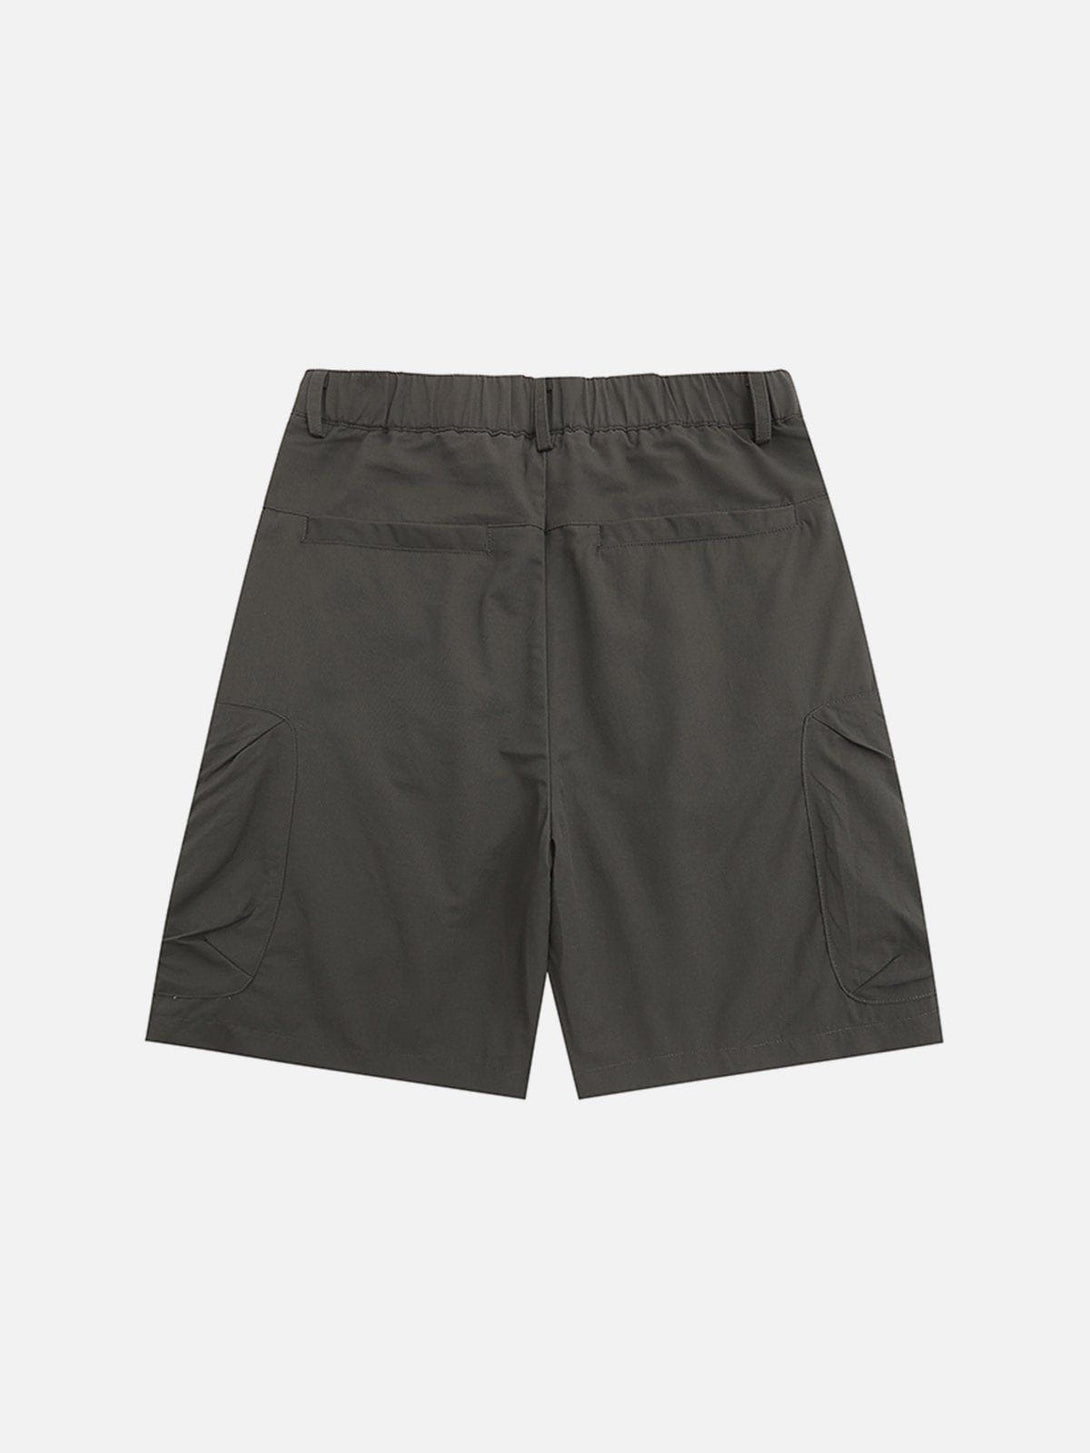 Levefly - Solid Color Side Zipper Pockets Cargo Shorts - Streetwear Fashion - levefly.com